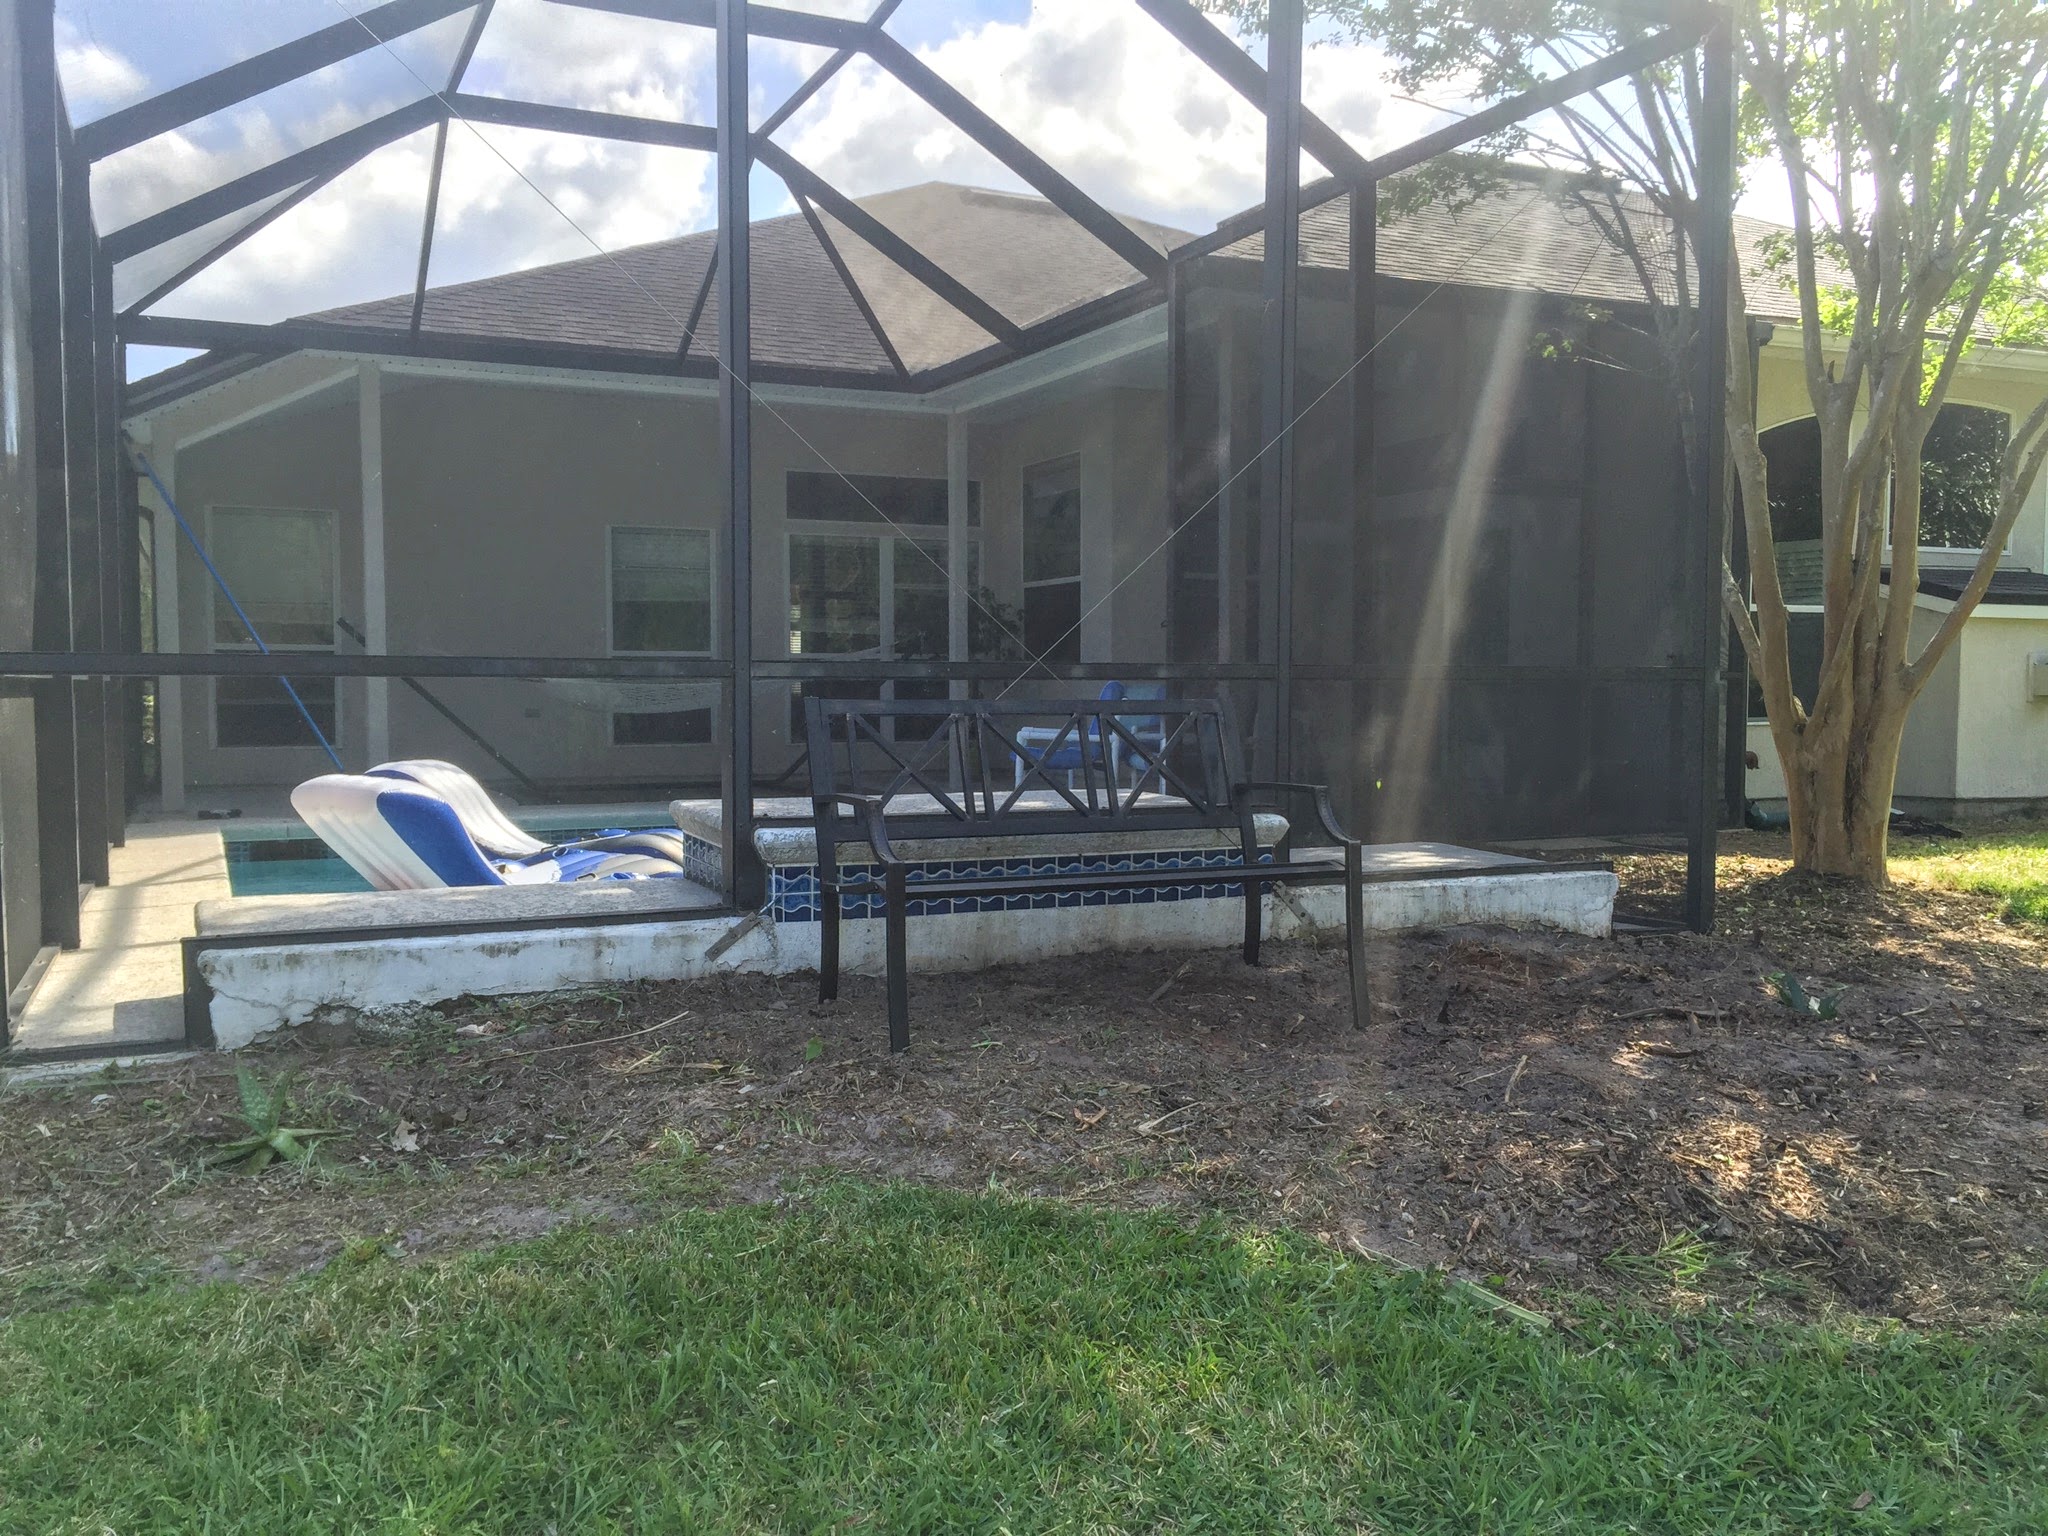  How We Turned Our Boring Backyard Into a Our Own Little Slice of Paradise | House Full of Summer backyard before and afters pool enclosure Florida home water view backyard design, coastal home, overgrown backyard, patio design, pool and pond, landsc